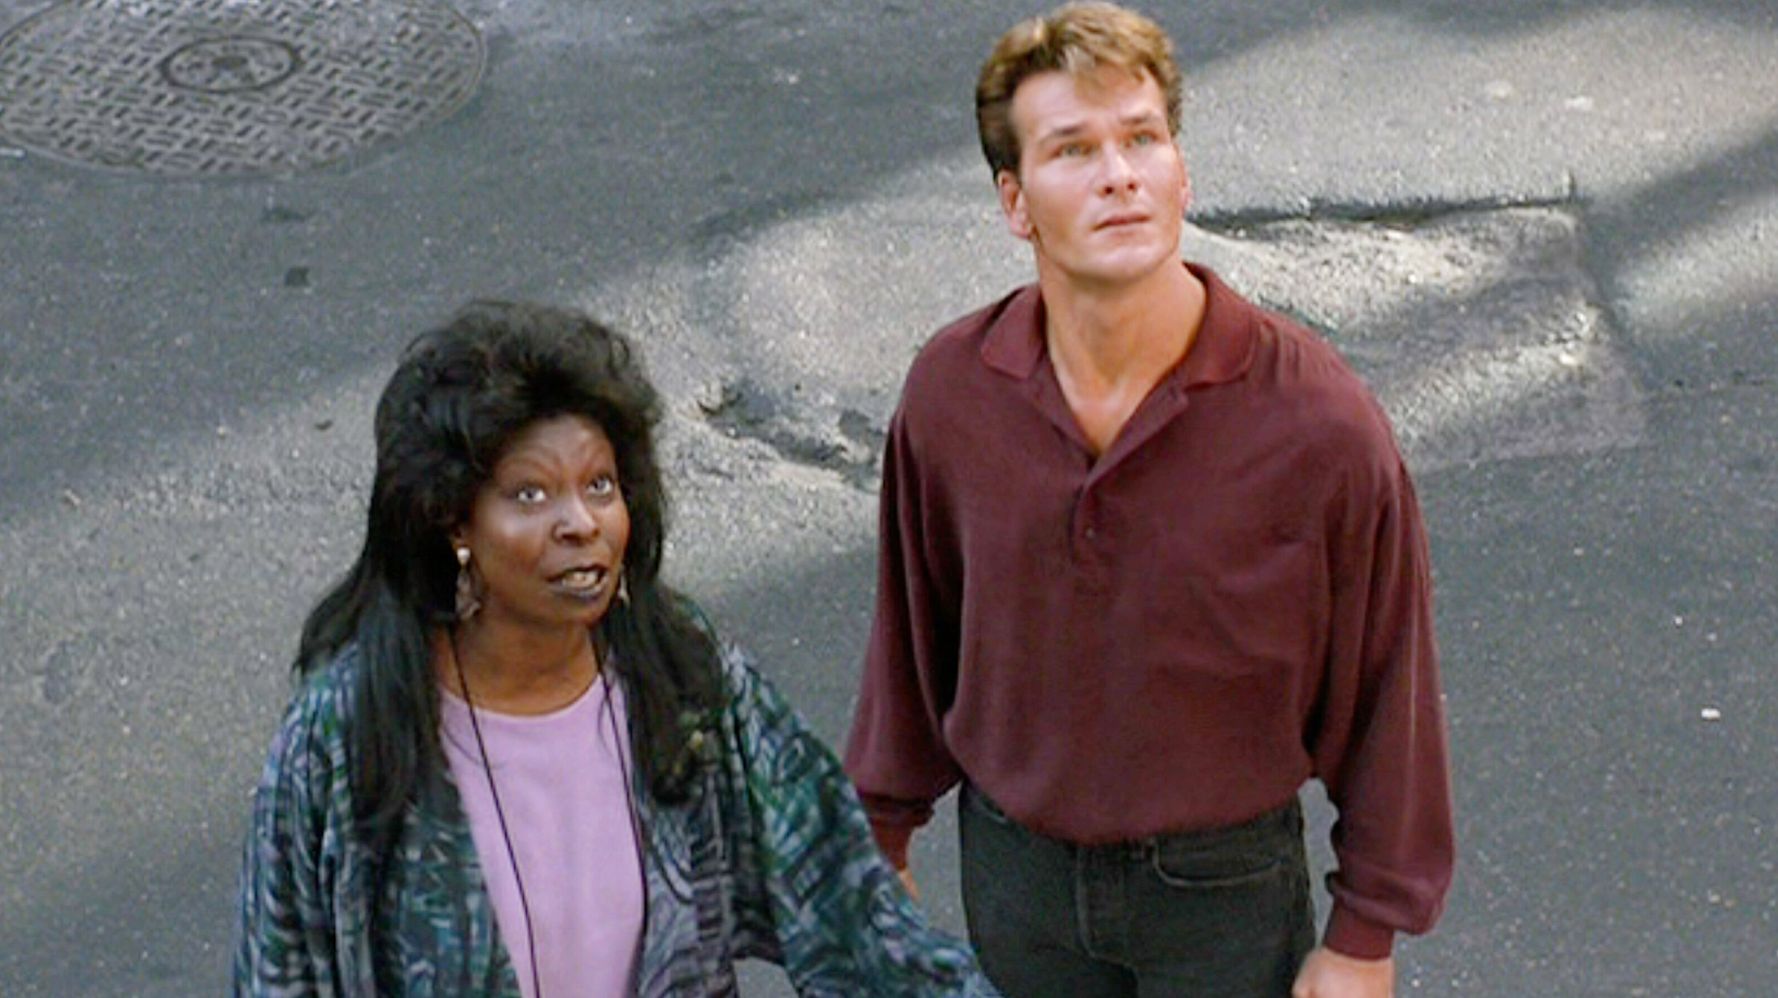 Whoopi Goldberg Reveals Patrick Swayze Fought For Her To Get Iconic ‘Ghost’ Role